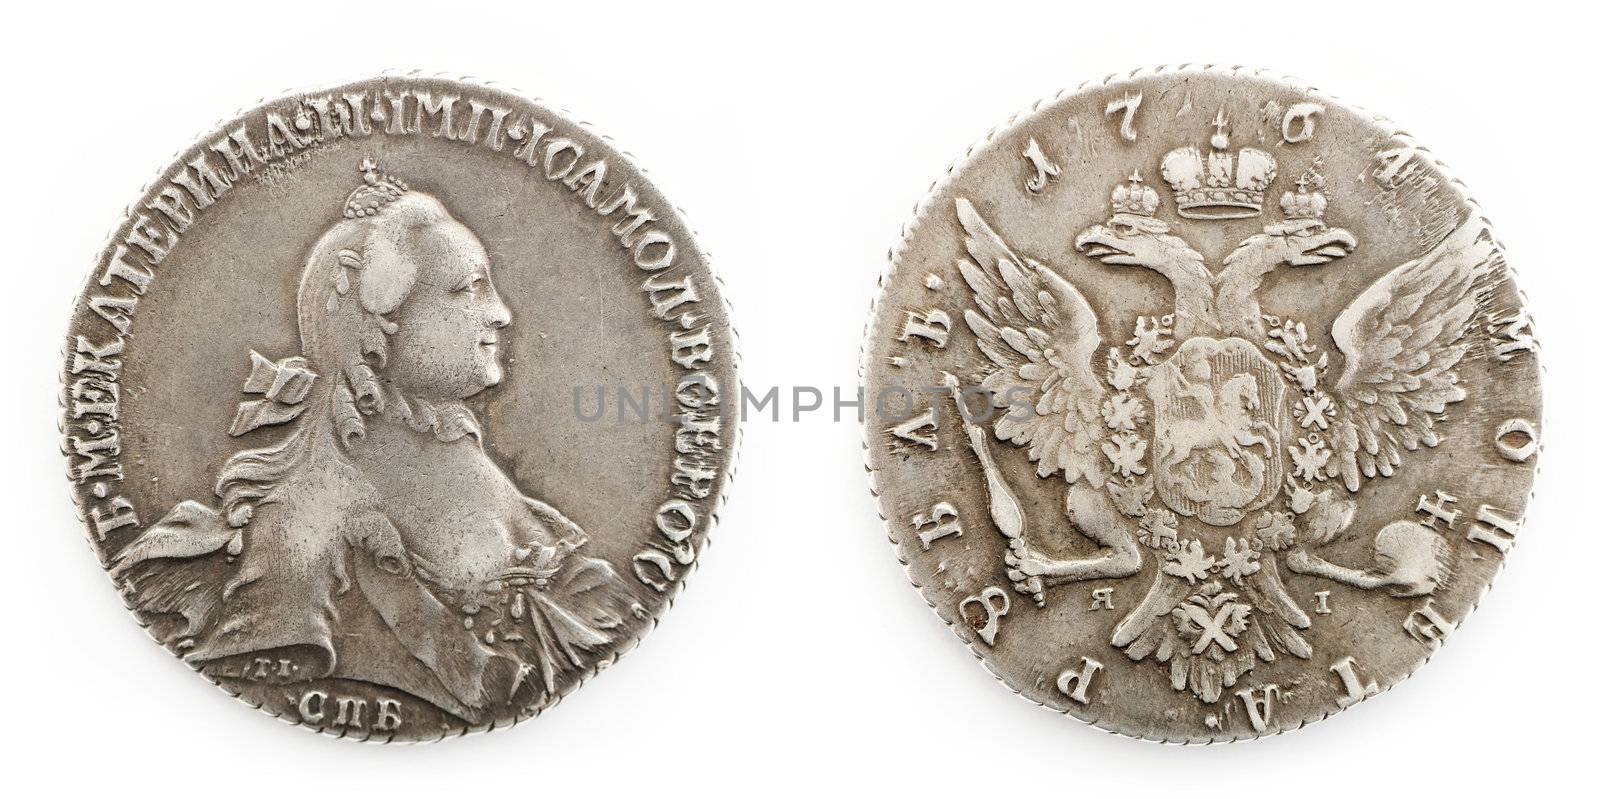 Antiques coin isolated on the white background